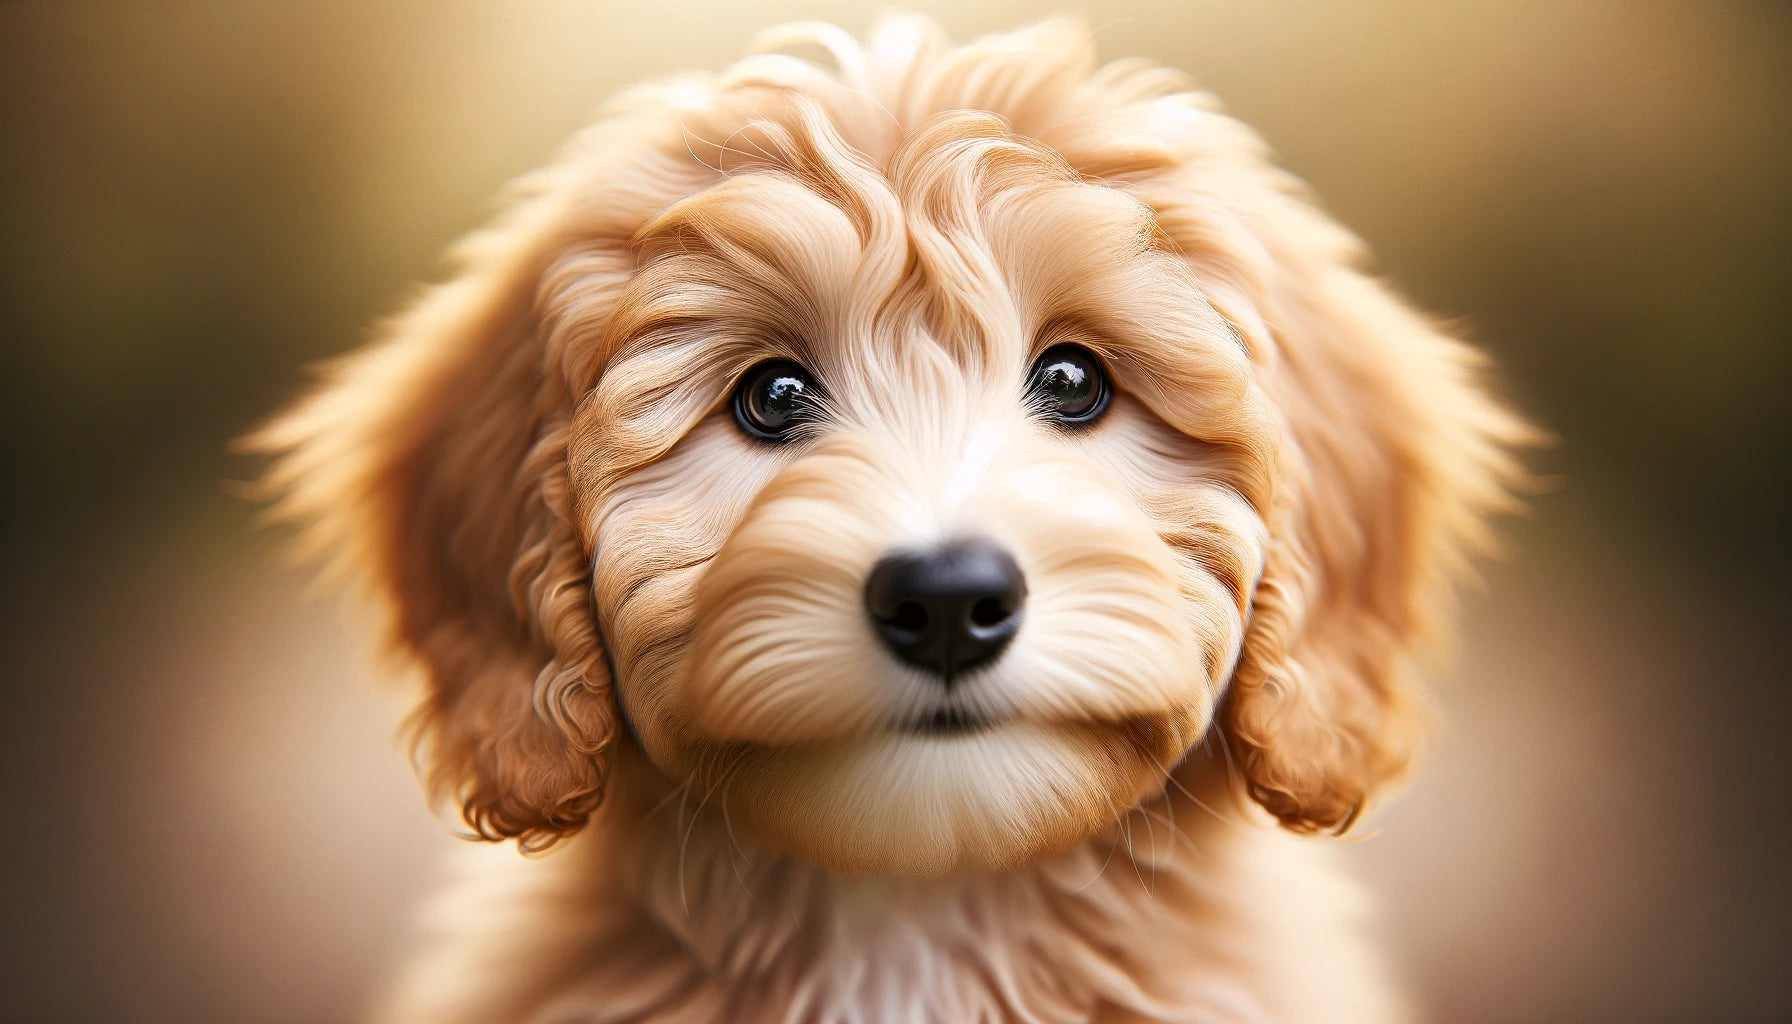 Mini Goldendoodle puppy showcasing its soft curly coat and big expressive eyes with a gentle smile that captures the breed's friendliness.